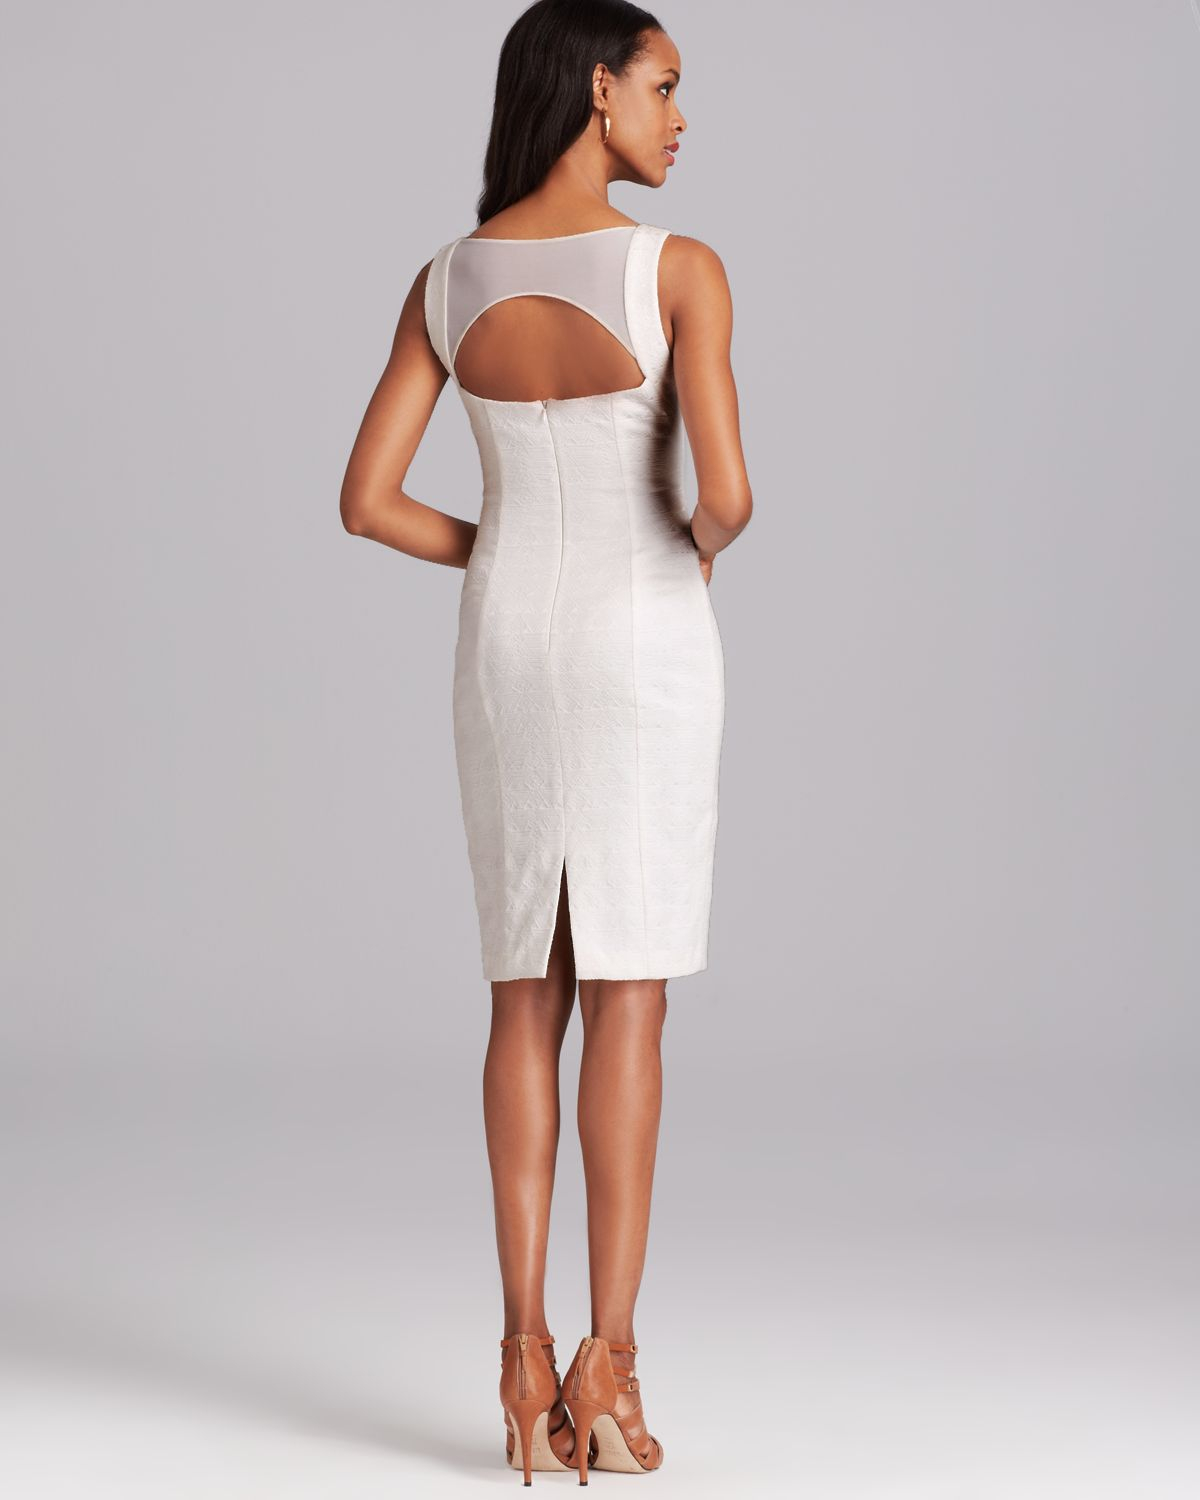 Lord And Taylor Silver Dress | lupon.gov.ph